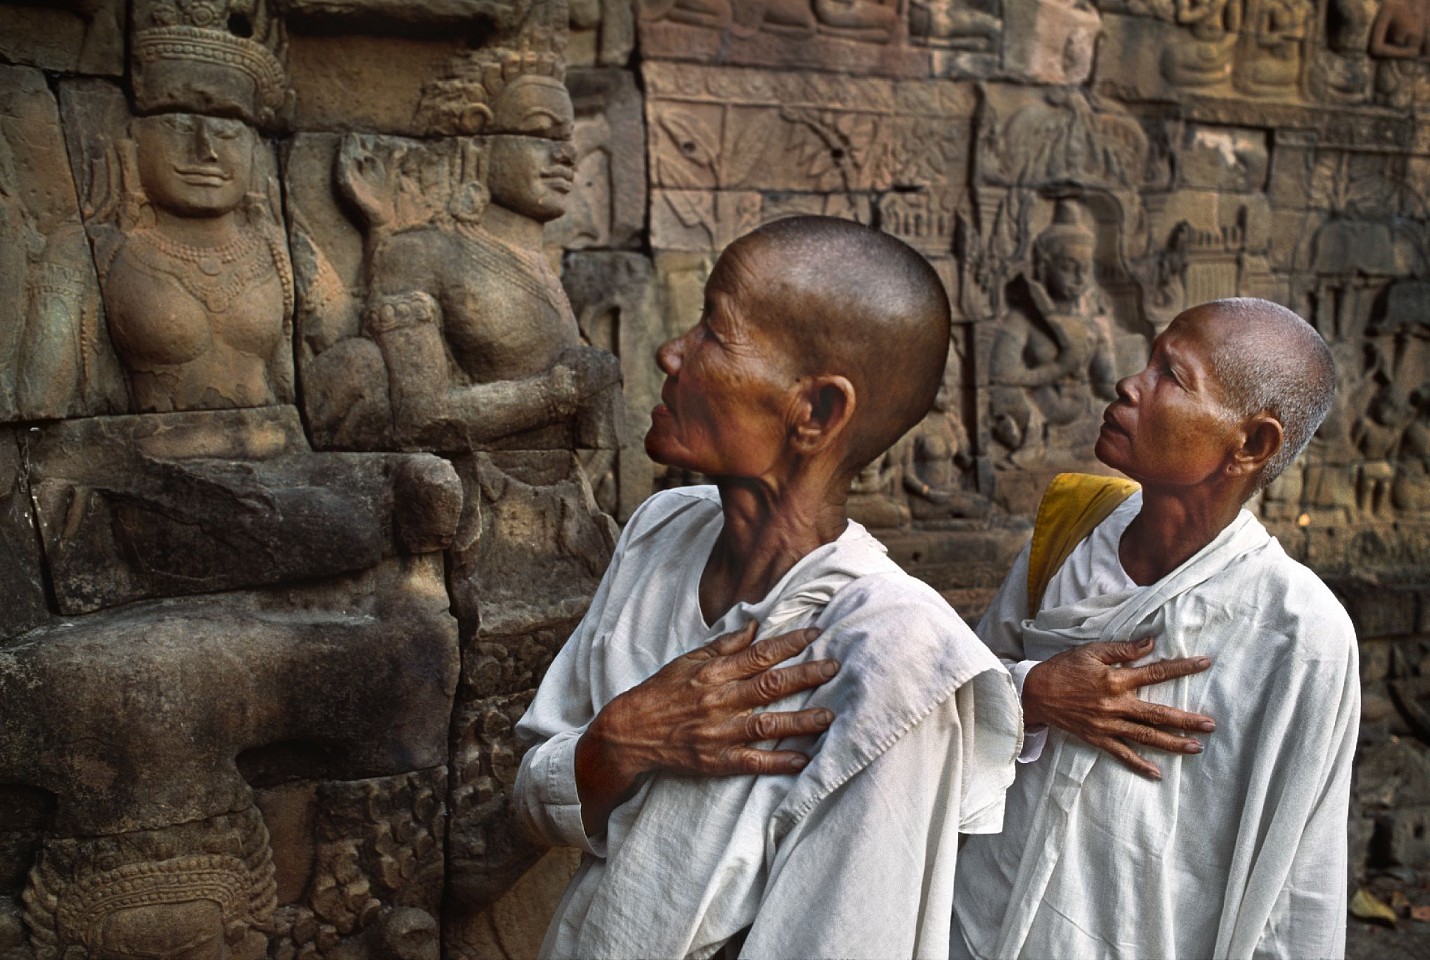 Steve McCurry, Buddhist nuns at the Leper King Terrace, Palace Area, Angkor Thom, 1998
FujiFlex Crystal Archive Print
Price/Size on request